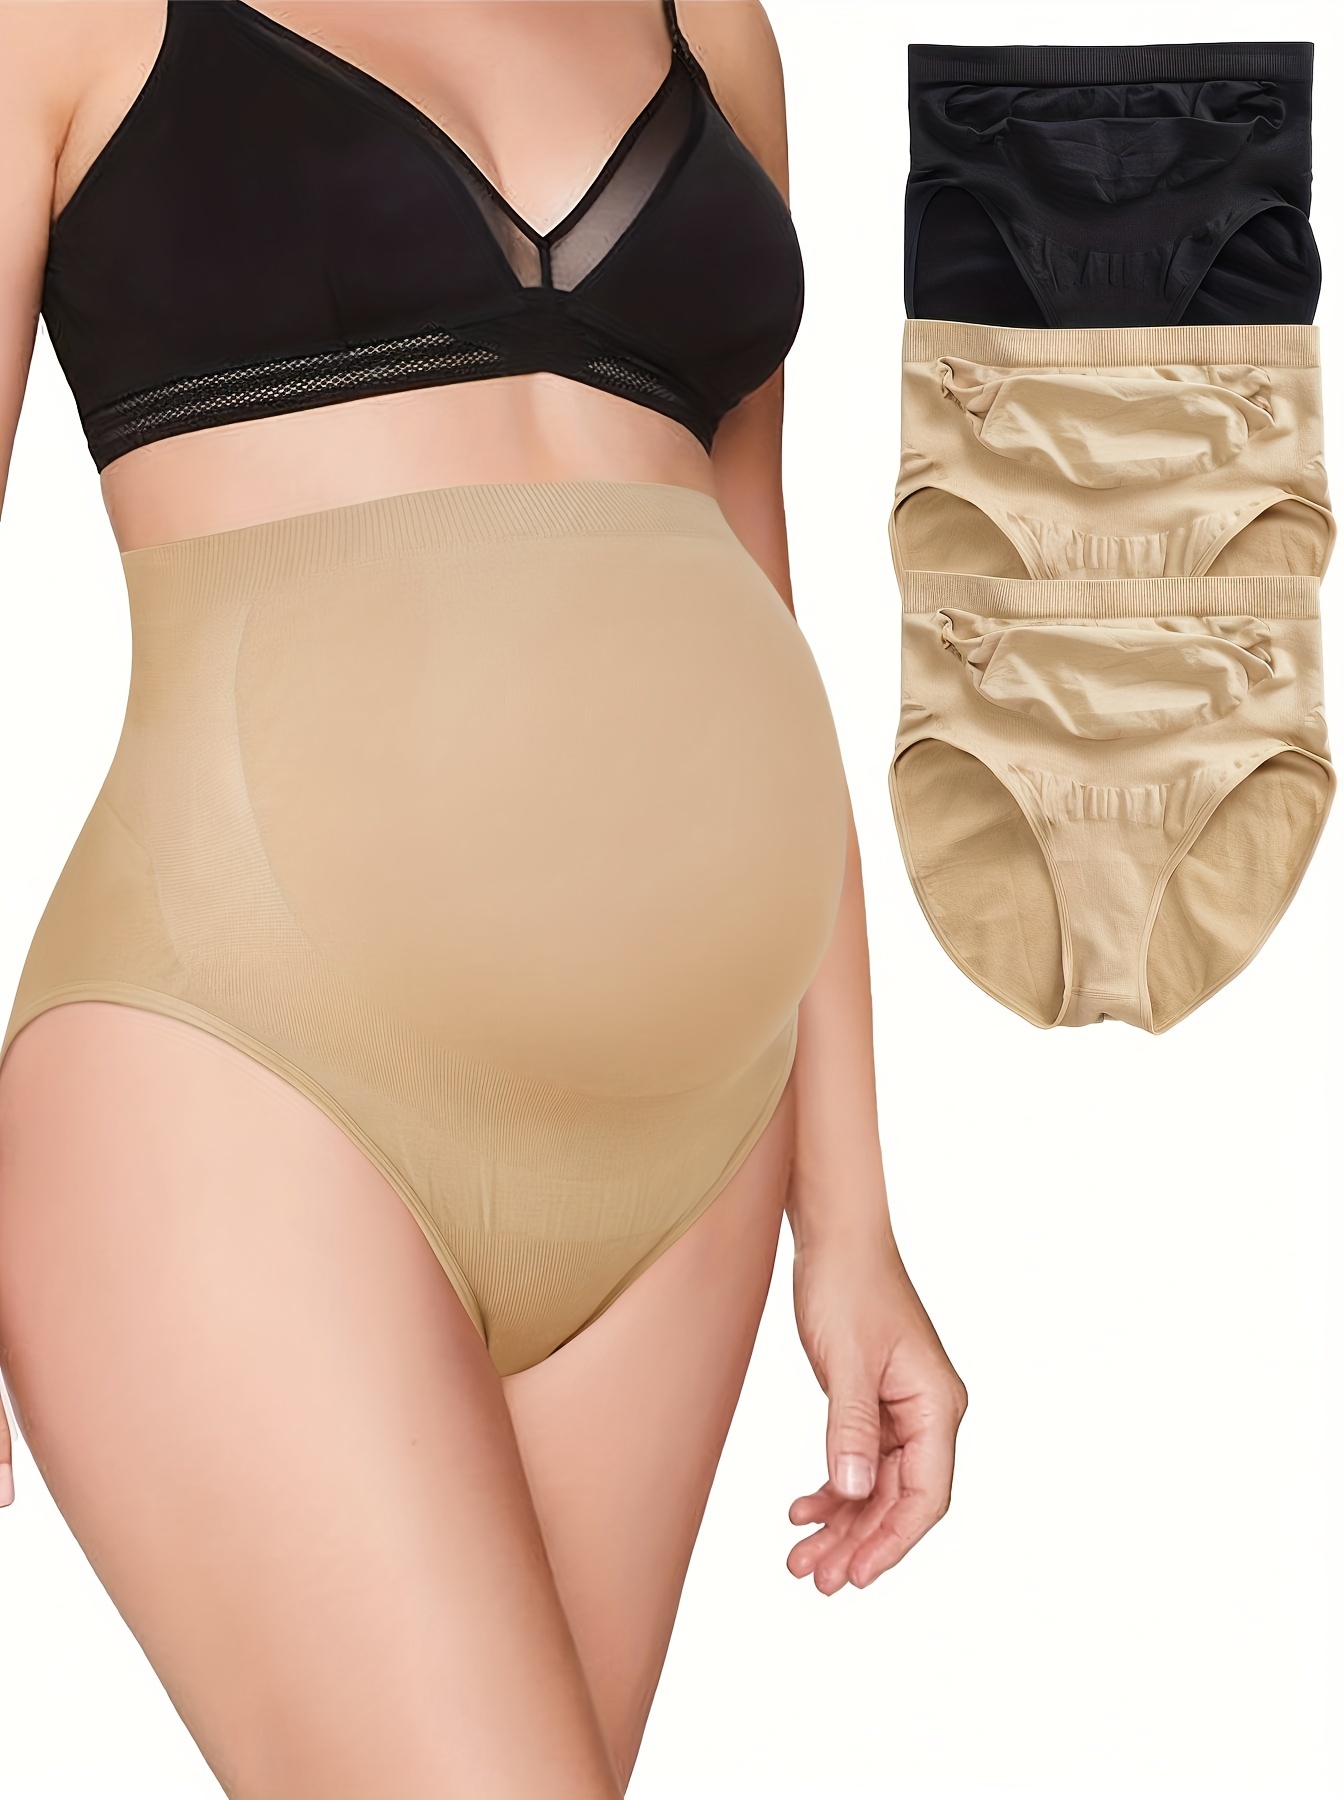 Pregnant Women's Adjustable High Waist And Belly Support Underwear For  Pregnancy Maternity Radiation Resistant For Pregnant Women